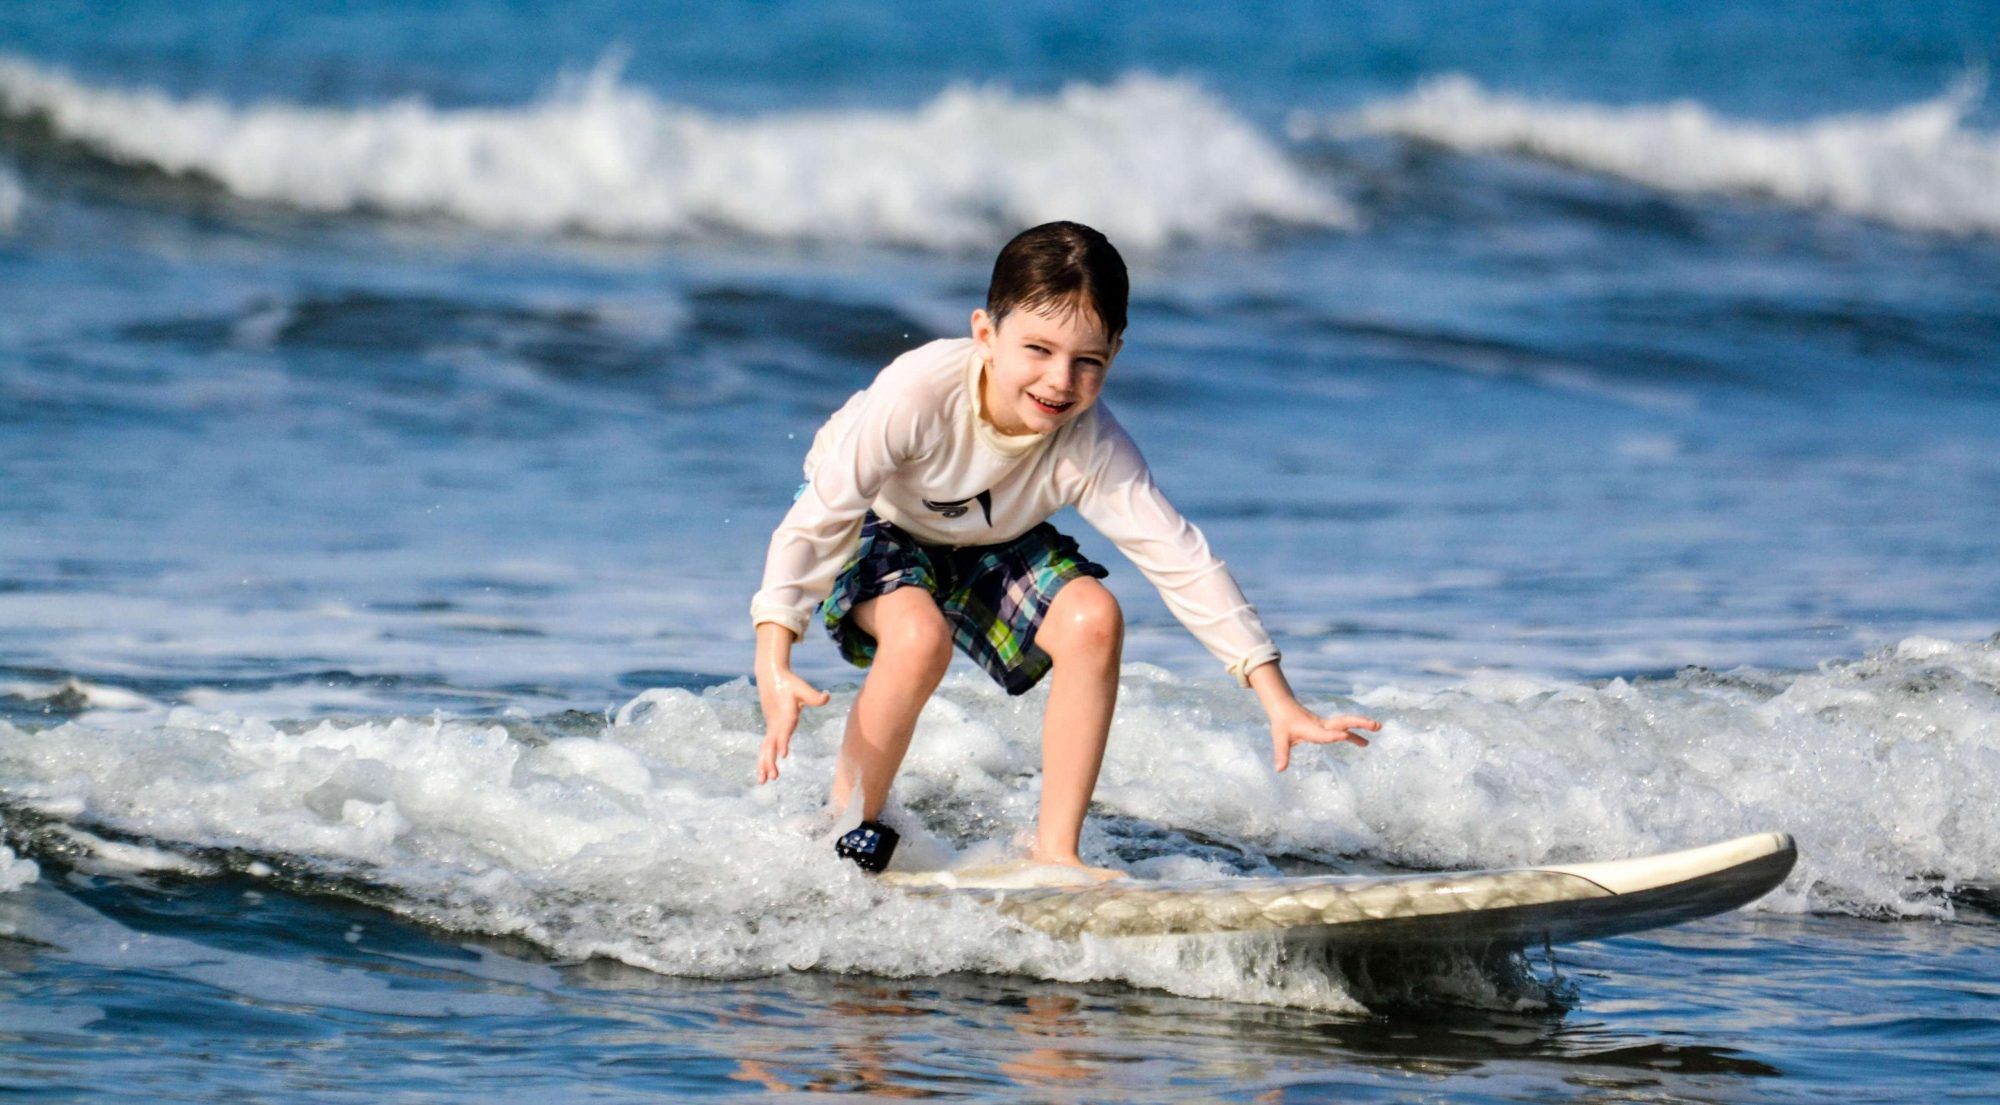 Child learning to surf in the whitewater